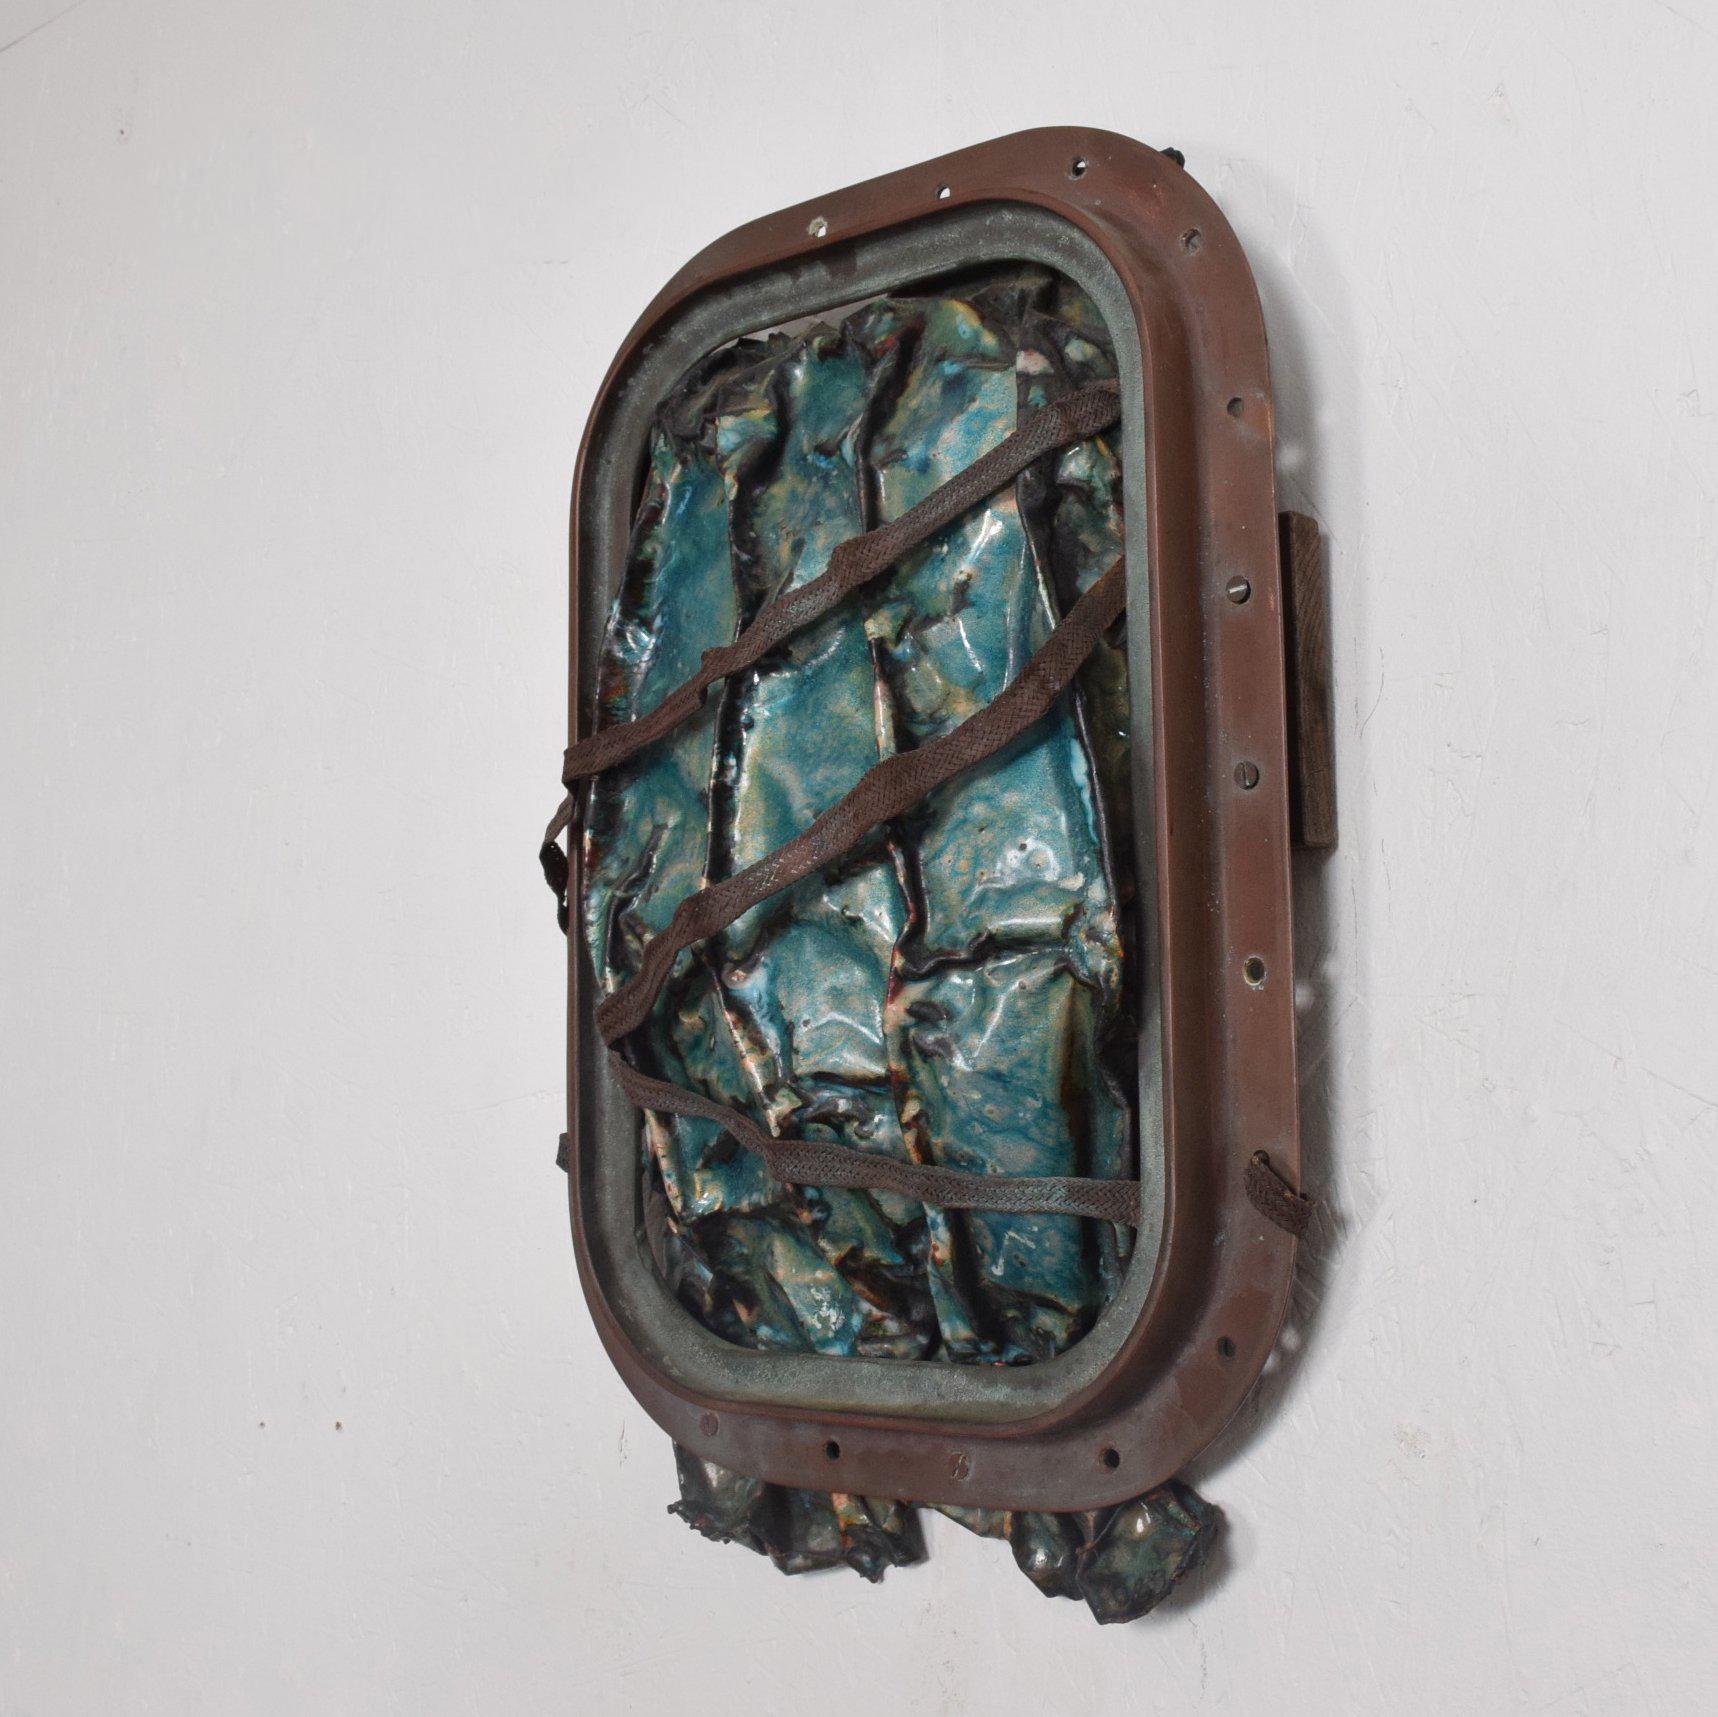 For your consideration a beautiful enamel on copper sculpture by Joann Tanzer.
Title: 